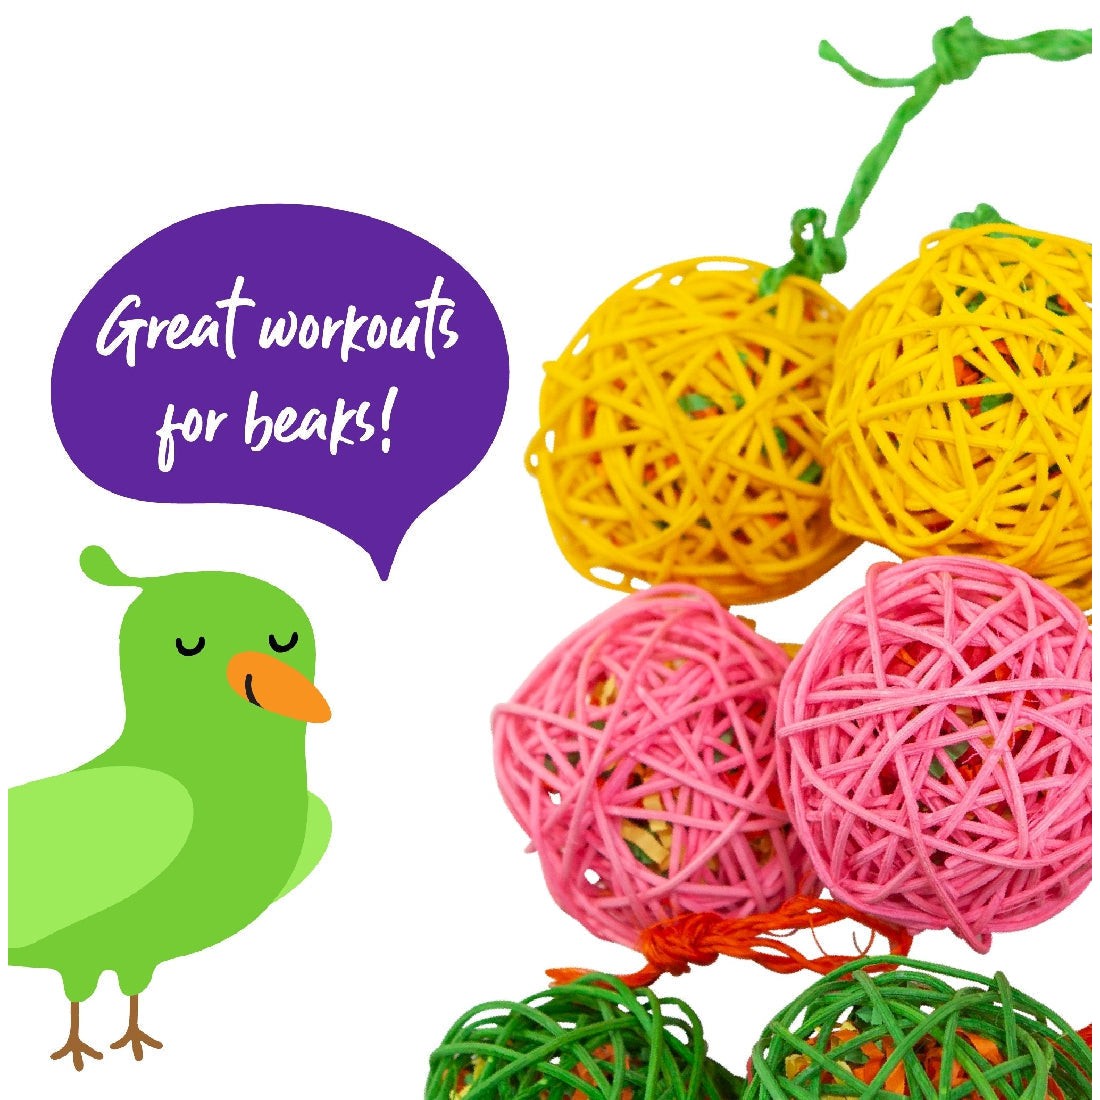 Cartoon bird with colorful wicker balls and "Great workouts for beaks!" text.